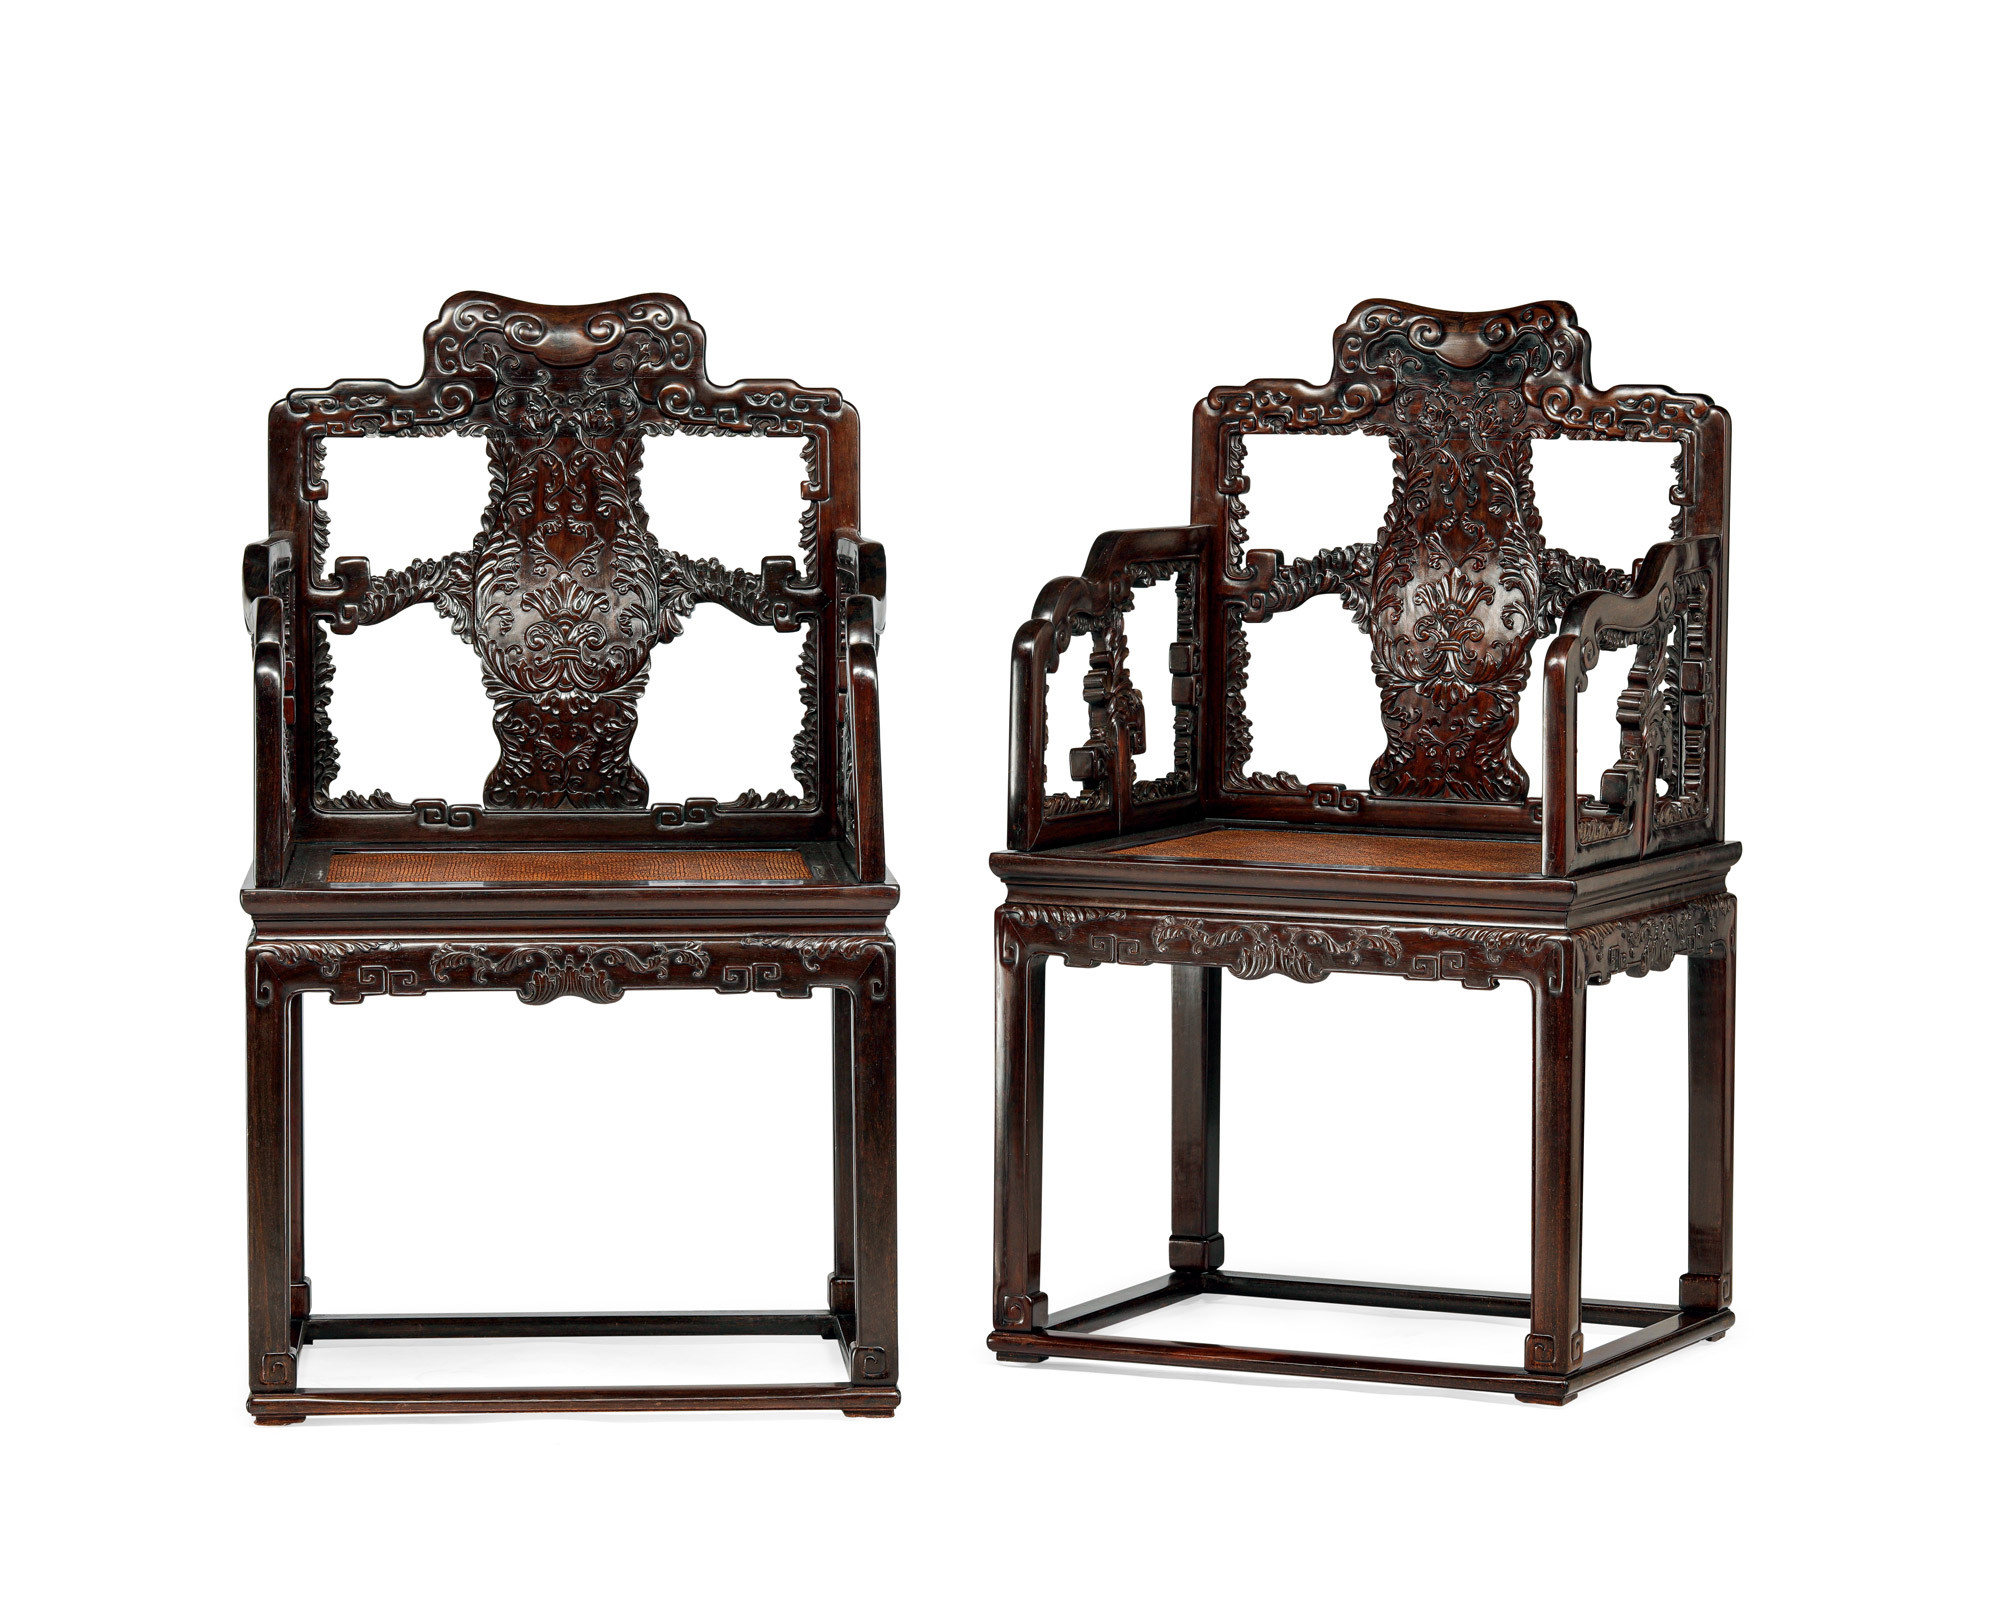 PAIR OF ZITAN CARVED WESTERN FLOWERS ARMCHAIR WITH ‘TUONI’ STAND